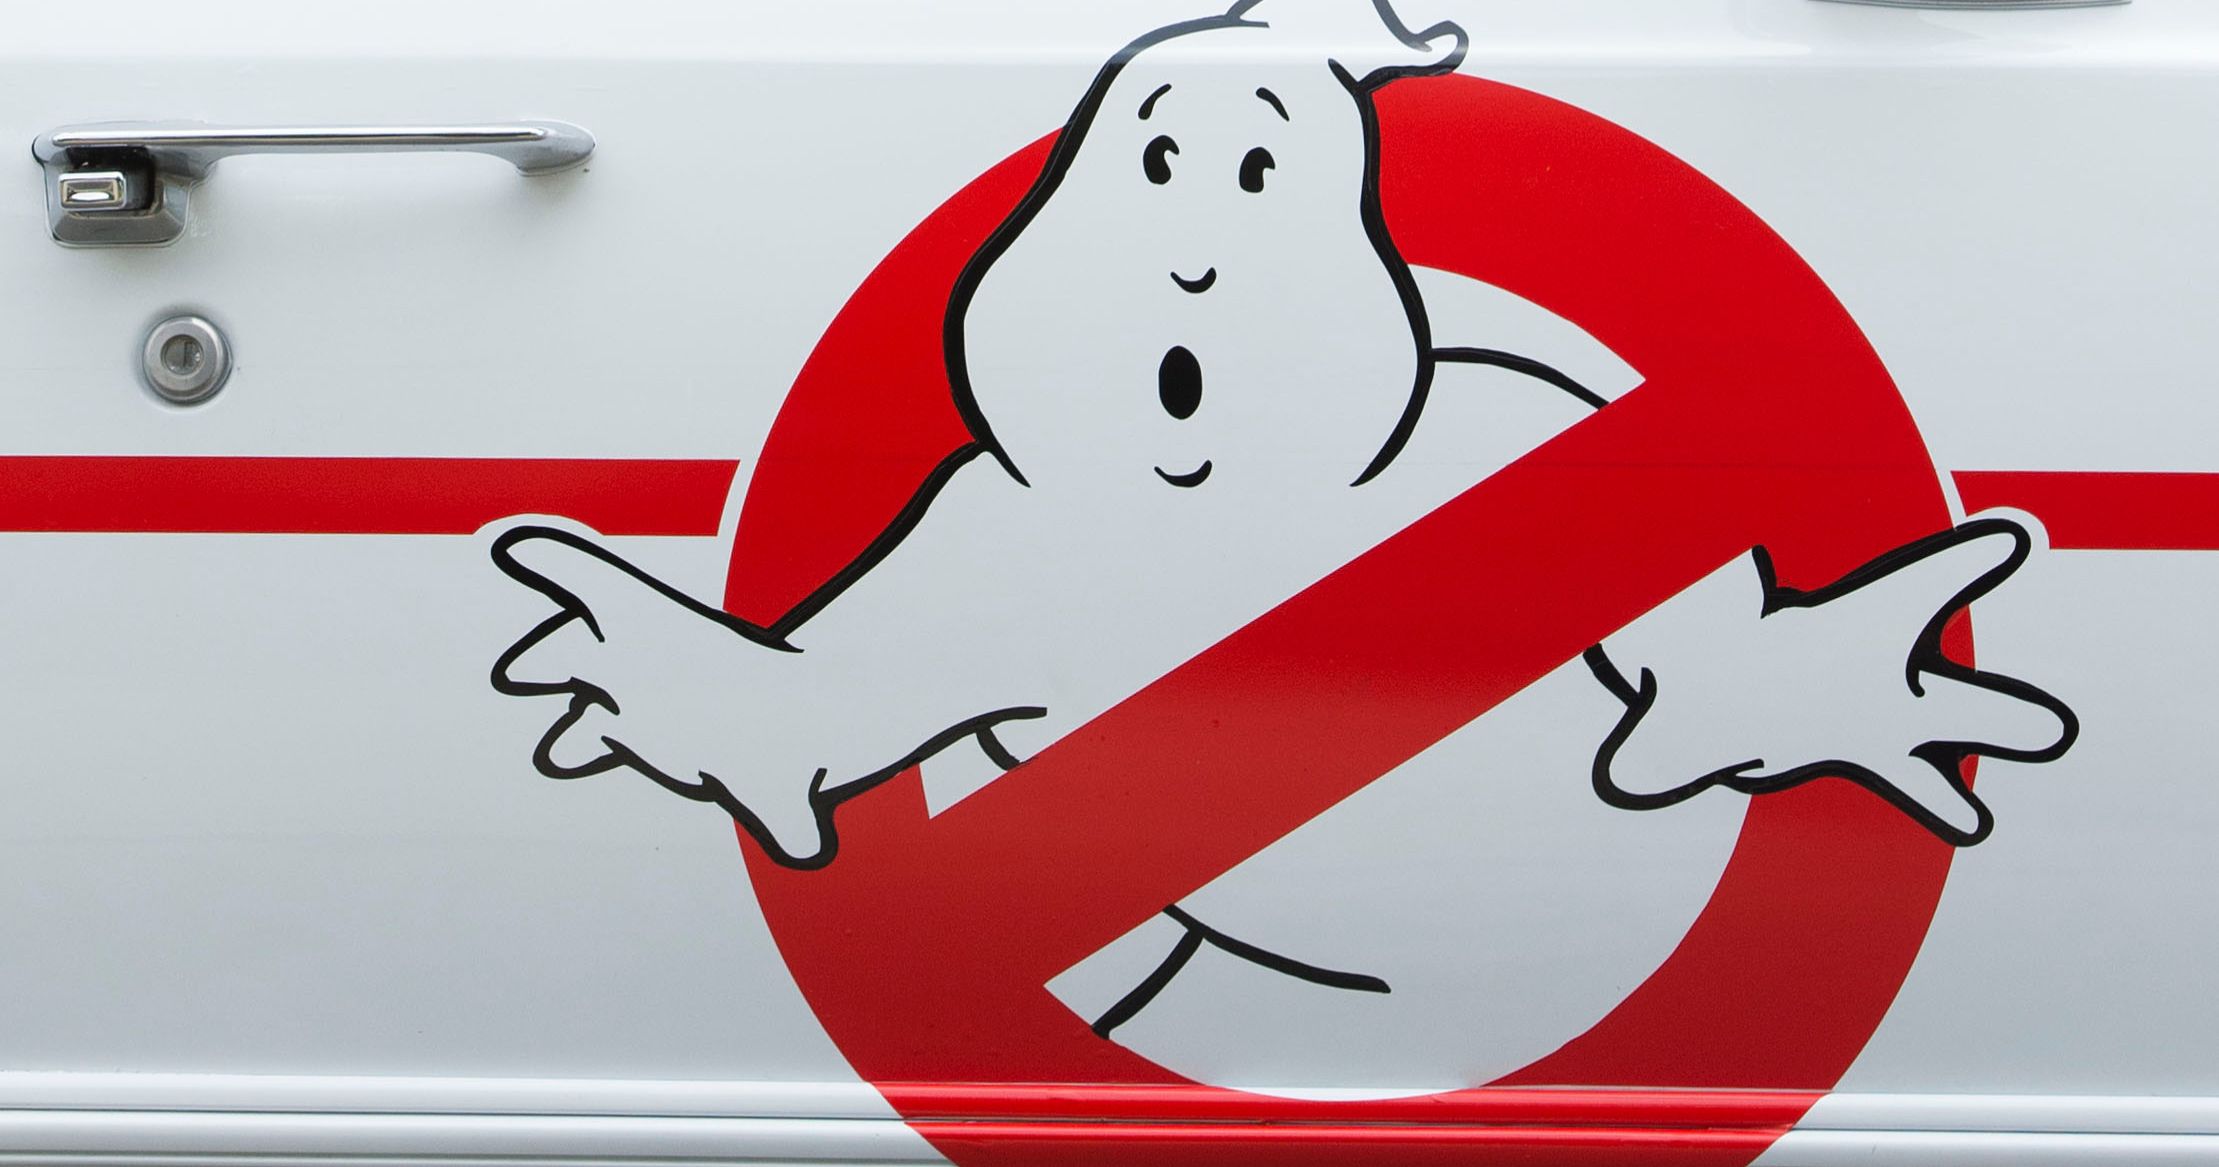 New Ghostbusters Toys Coming from Hasbro Just in Time for Ghostbusters 2020